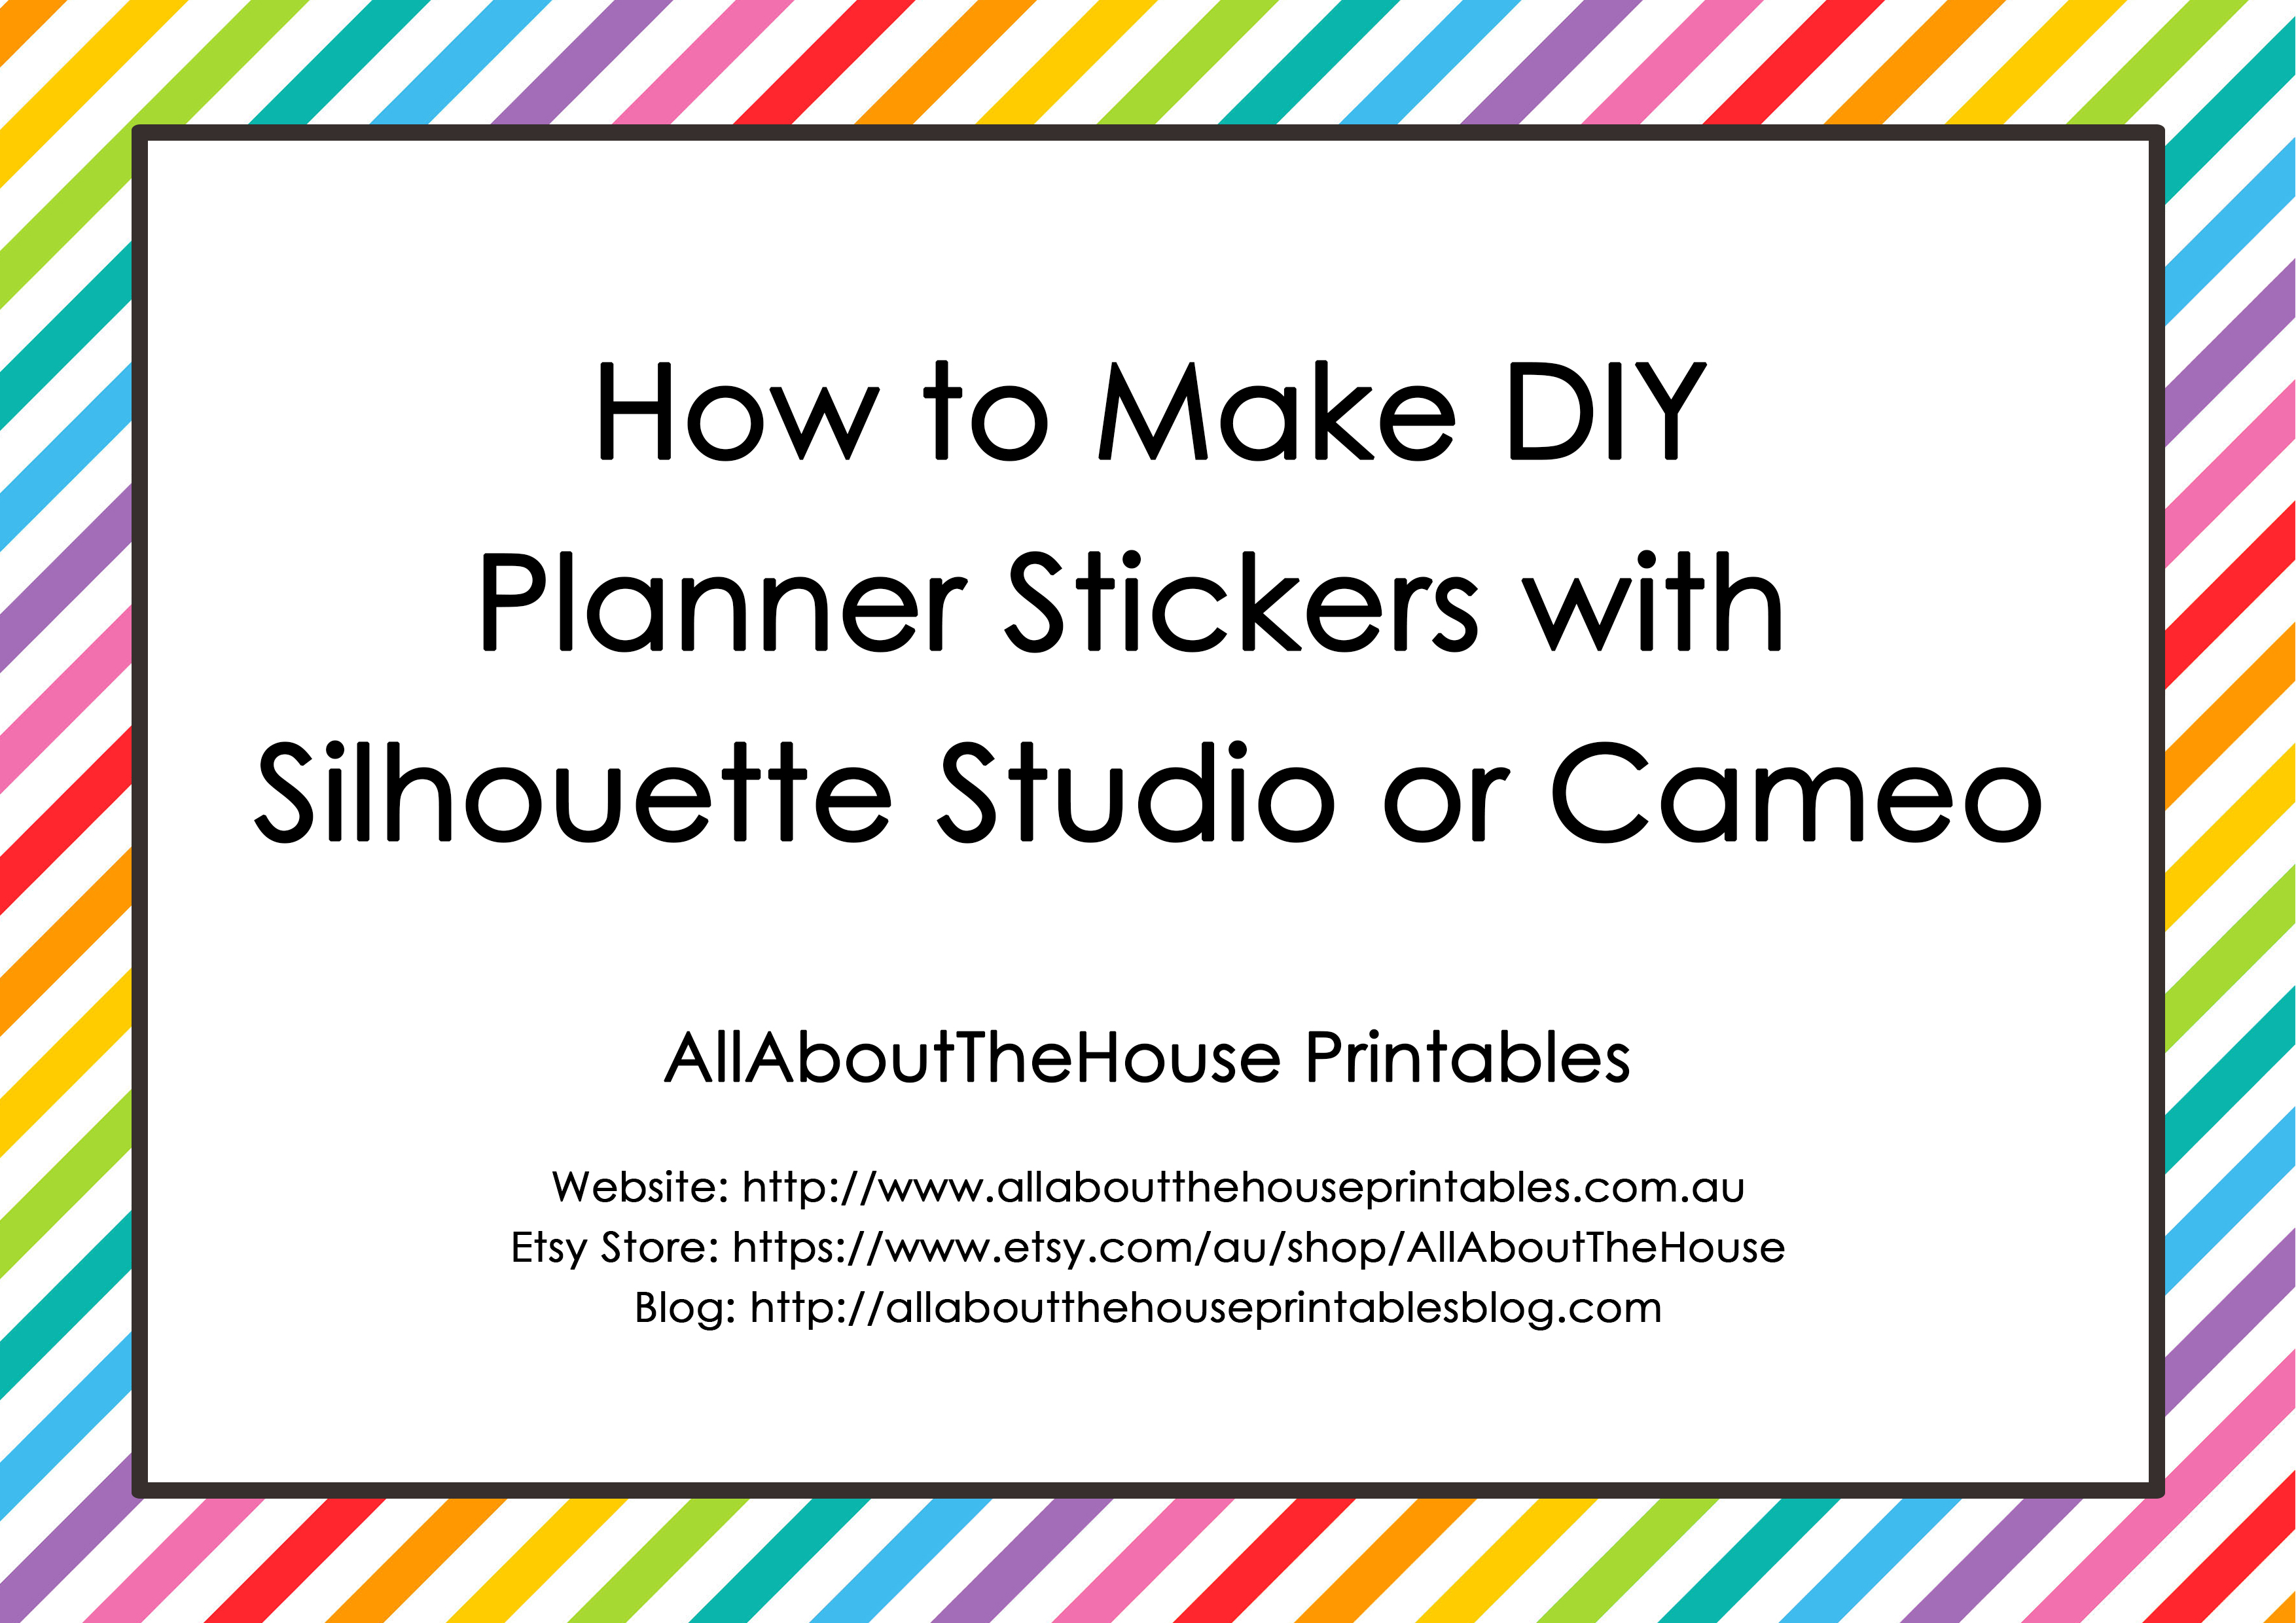 How to Make DIY Planner Stickers with Silhouette Studio or Cameo